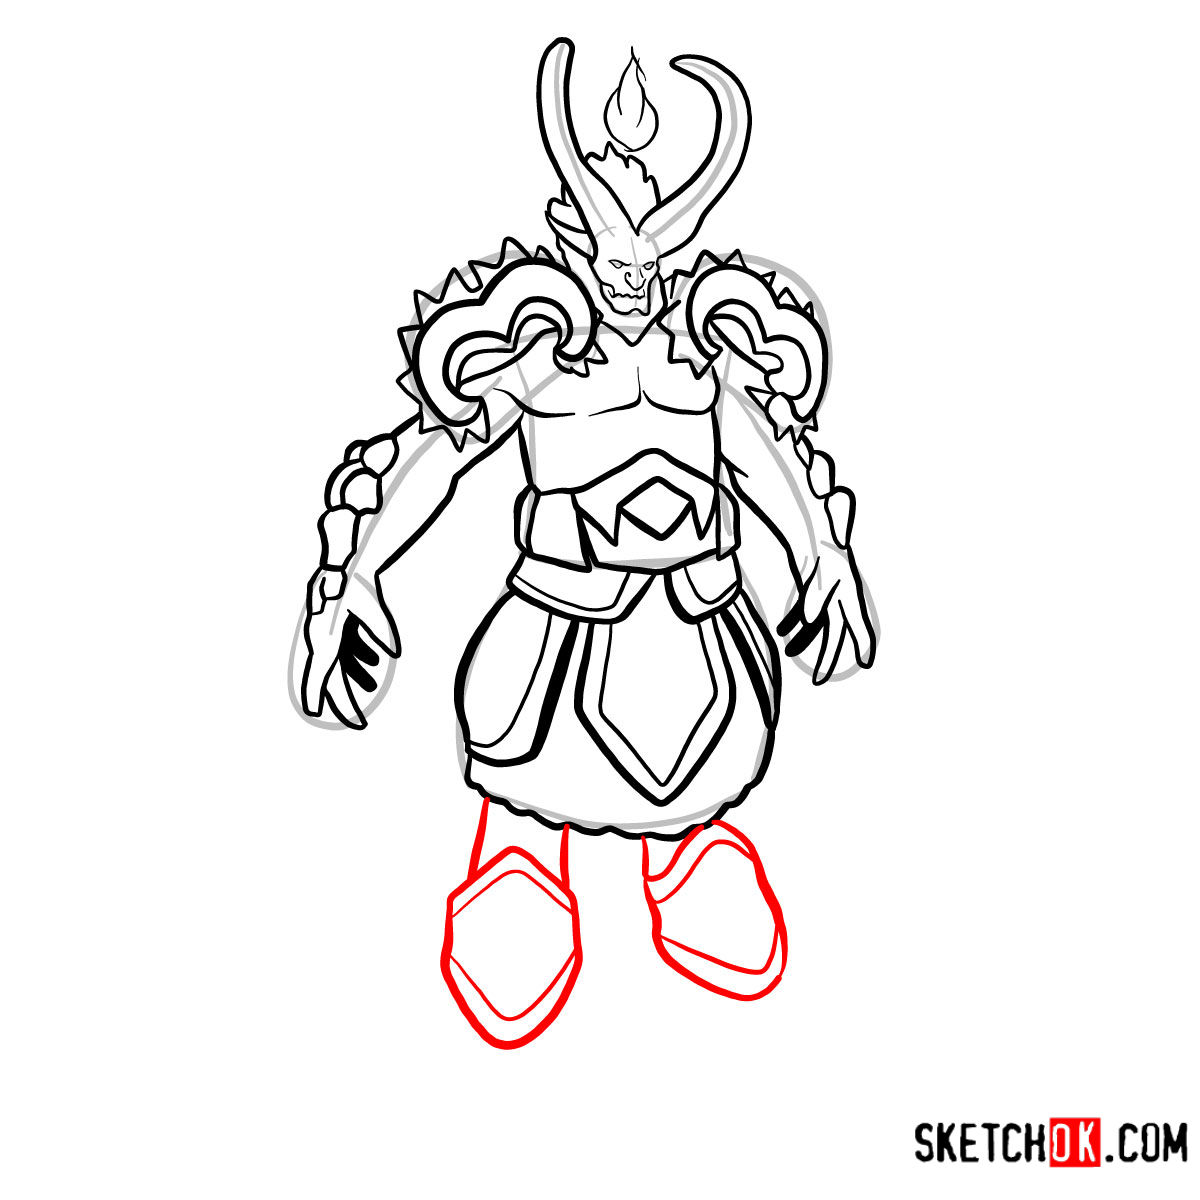 How to draw Sargeras | World of Warcraft - step 13